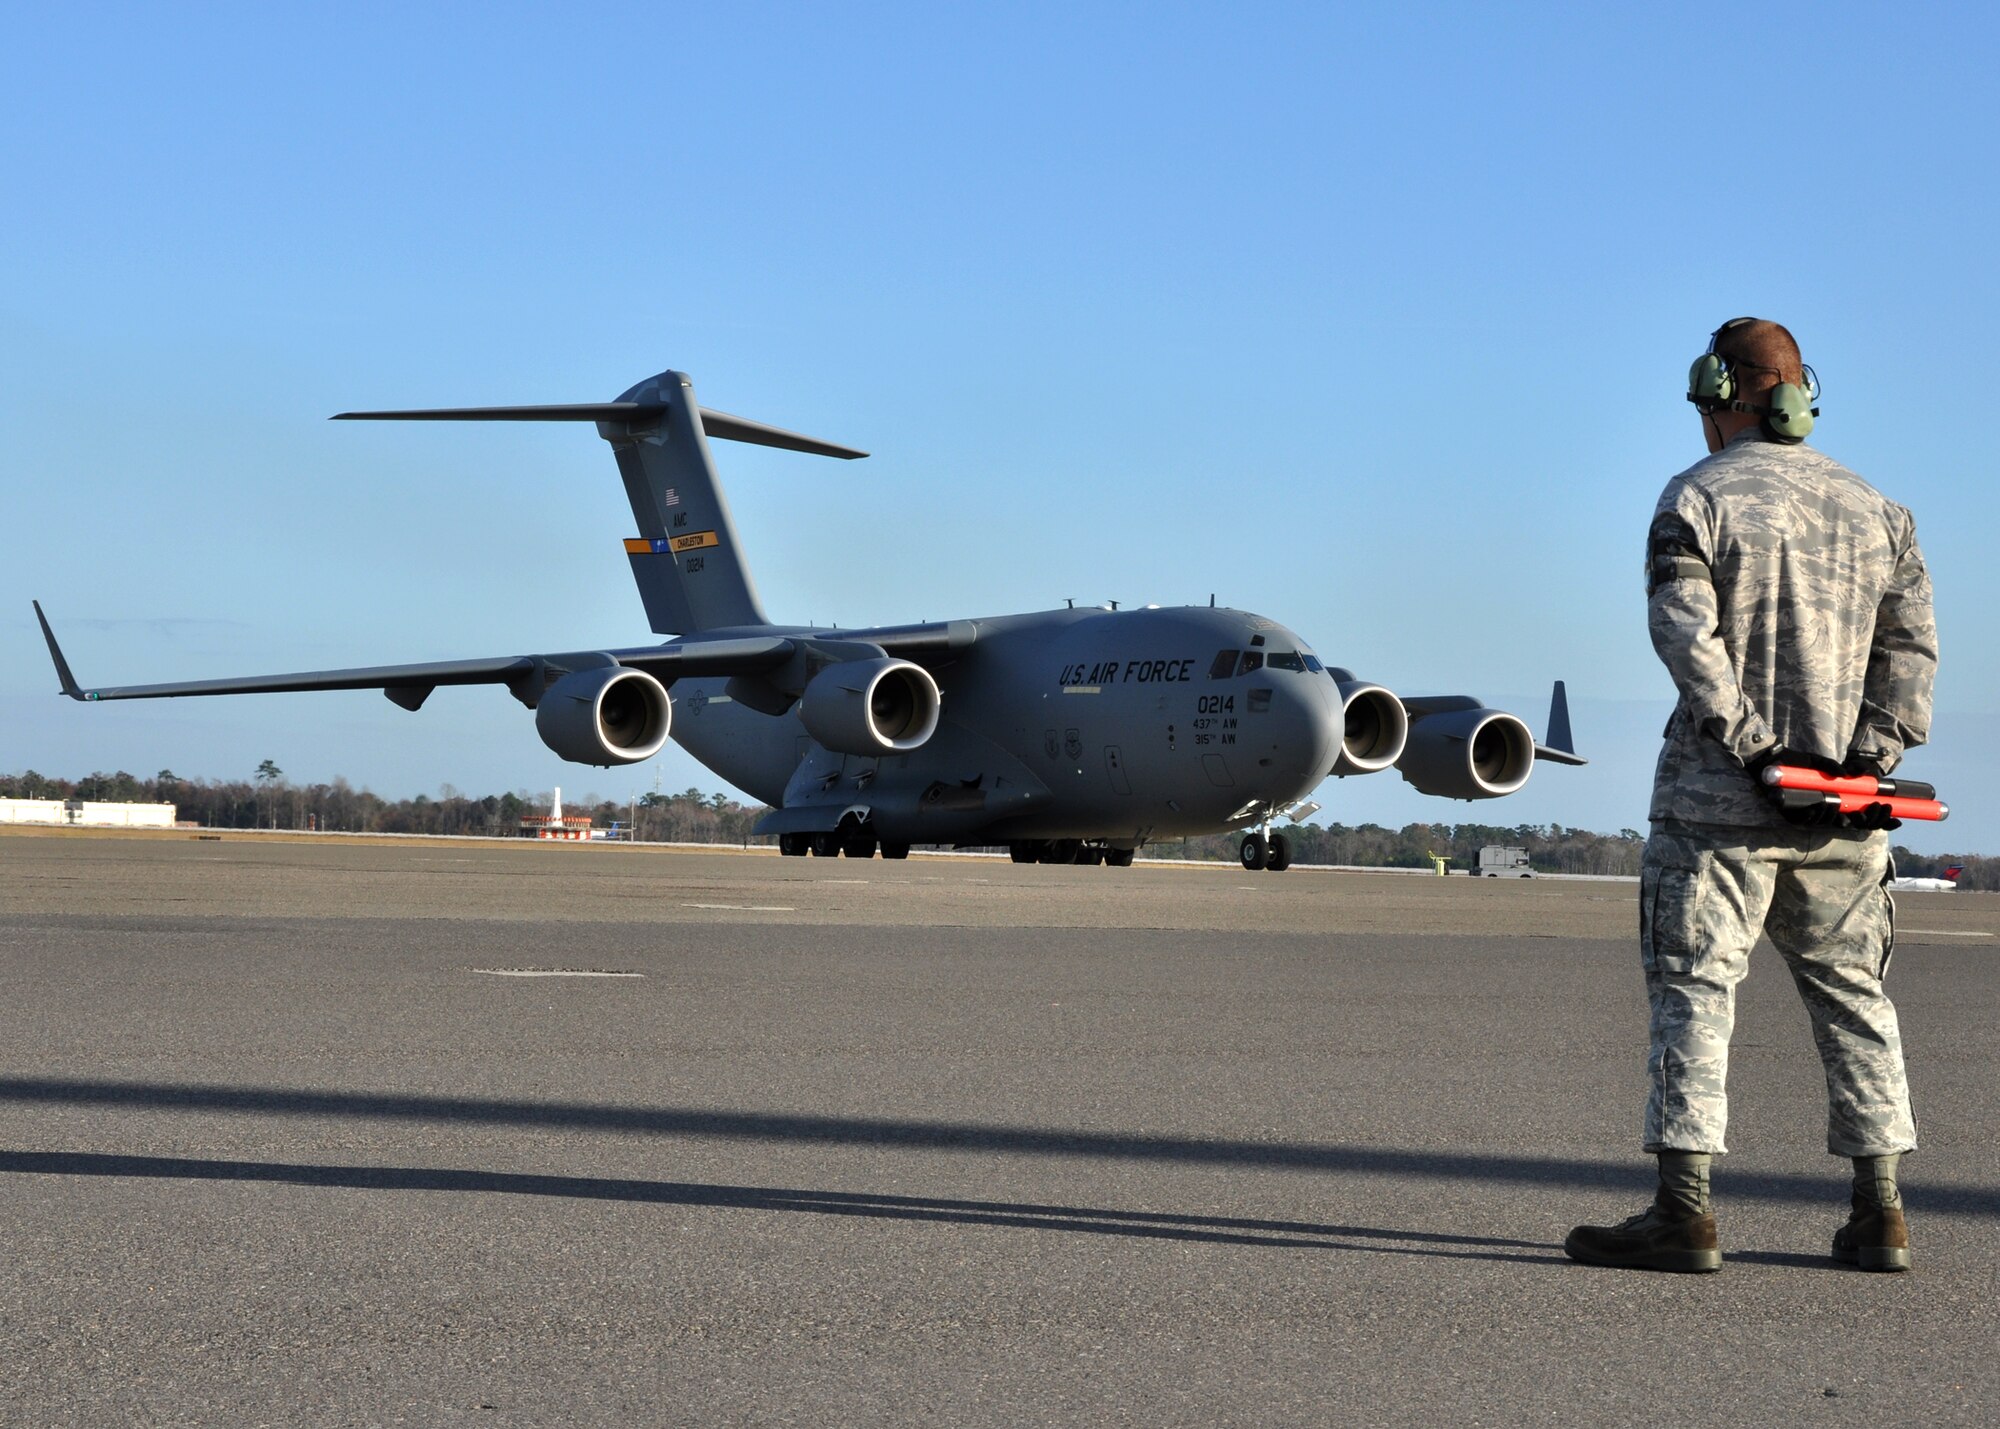 Piloted by Lt. Col. Mike DeSantis, of the 317th Airlift Wing, Joint Base Charleston's newest C-17 Globemaster III taxis to it's parking spot after a cross-country flight from the Boeing plant in Longbeach, Calif. Dec. 9, 2011.(U.S. Air Force Photo by Michael Dukes)